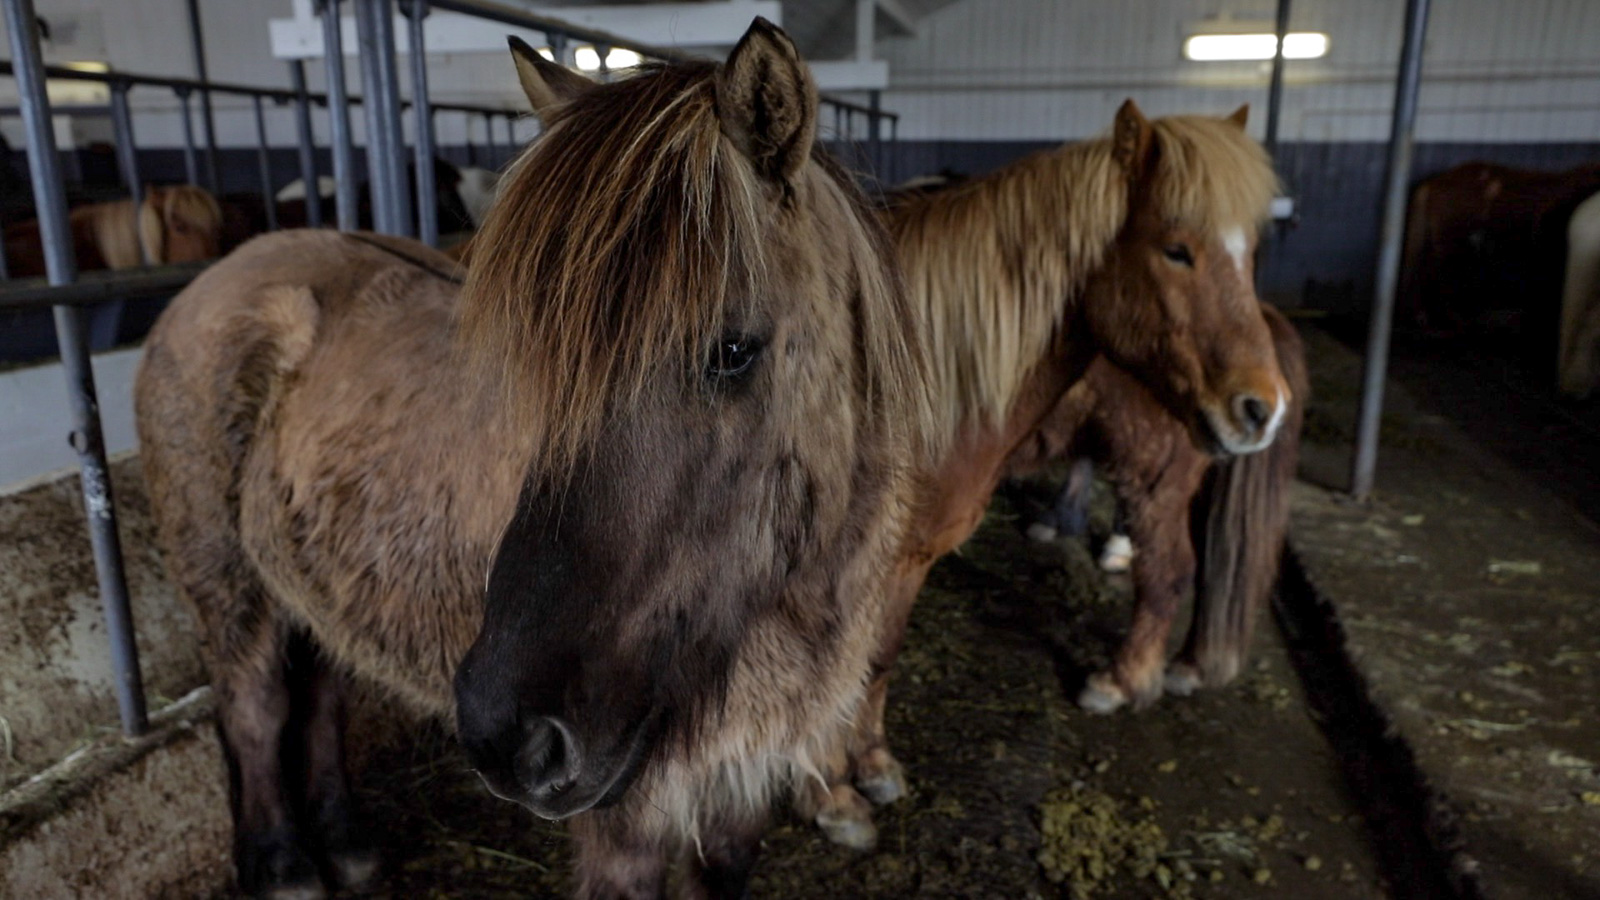 From Iceland – Demand for more Icelandic horses abroad